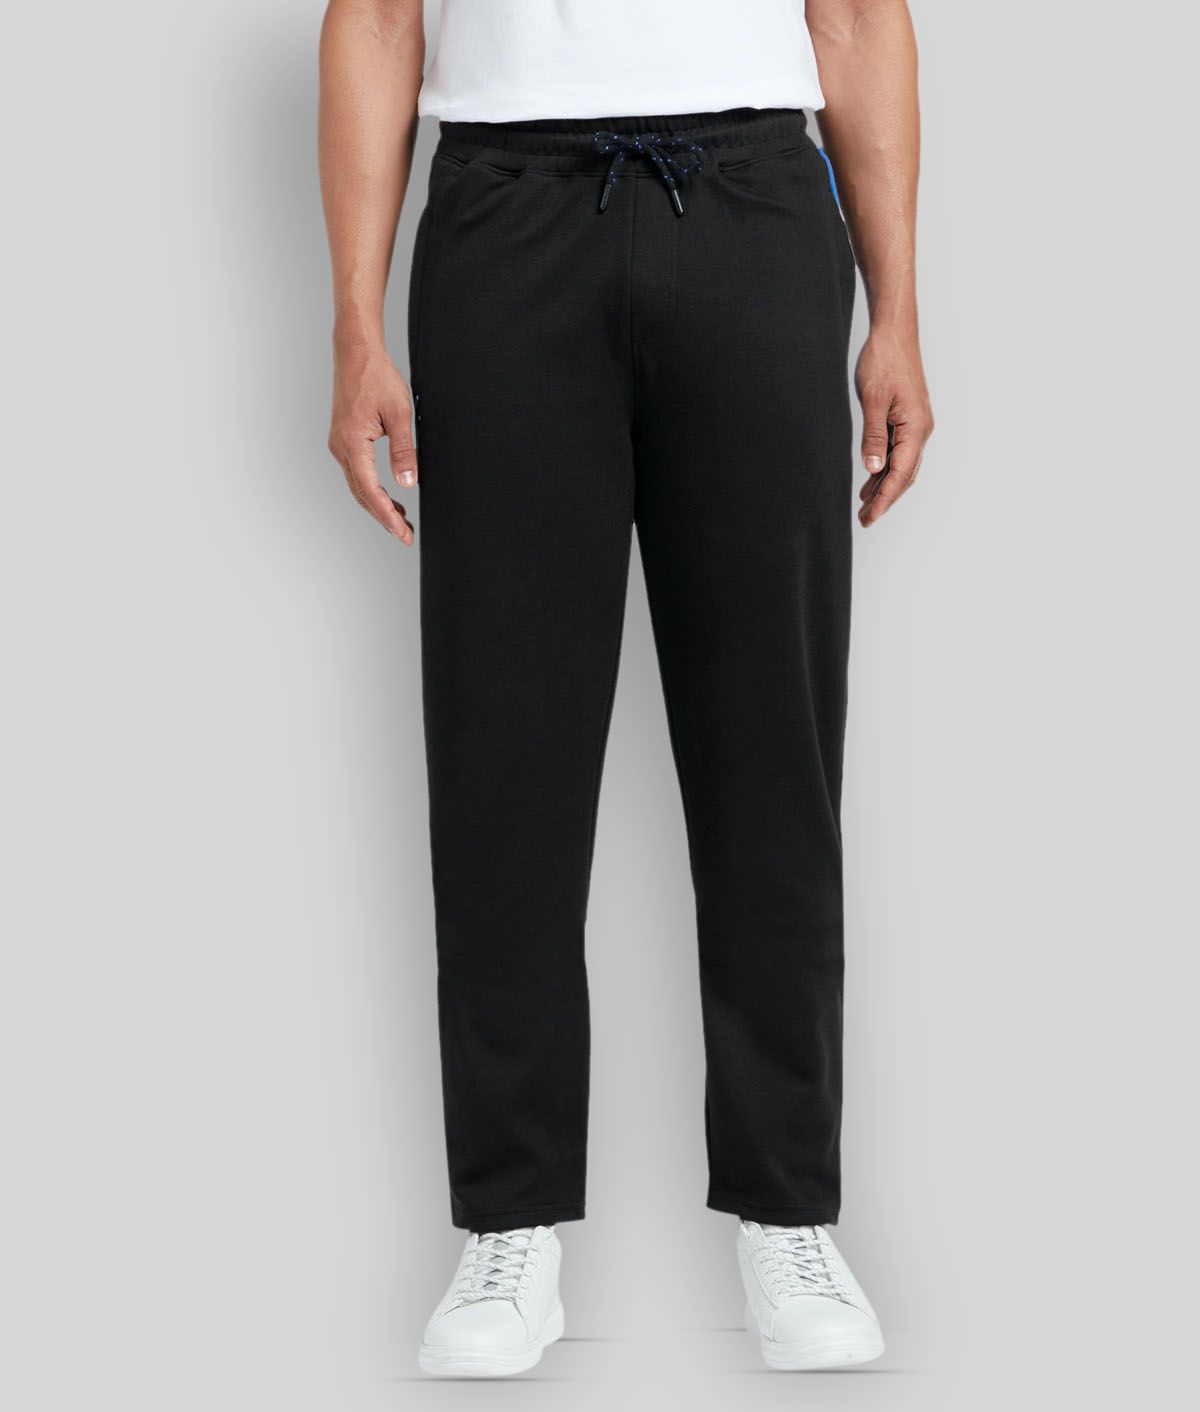     			XYXX - Black Cotton Men's Trackpants ( Pack of 1 )